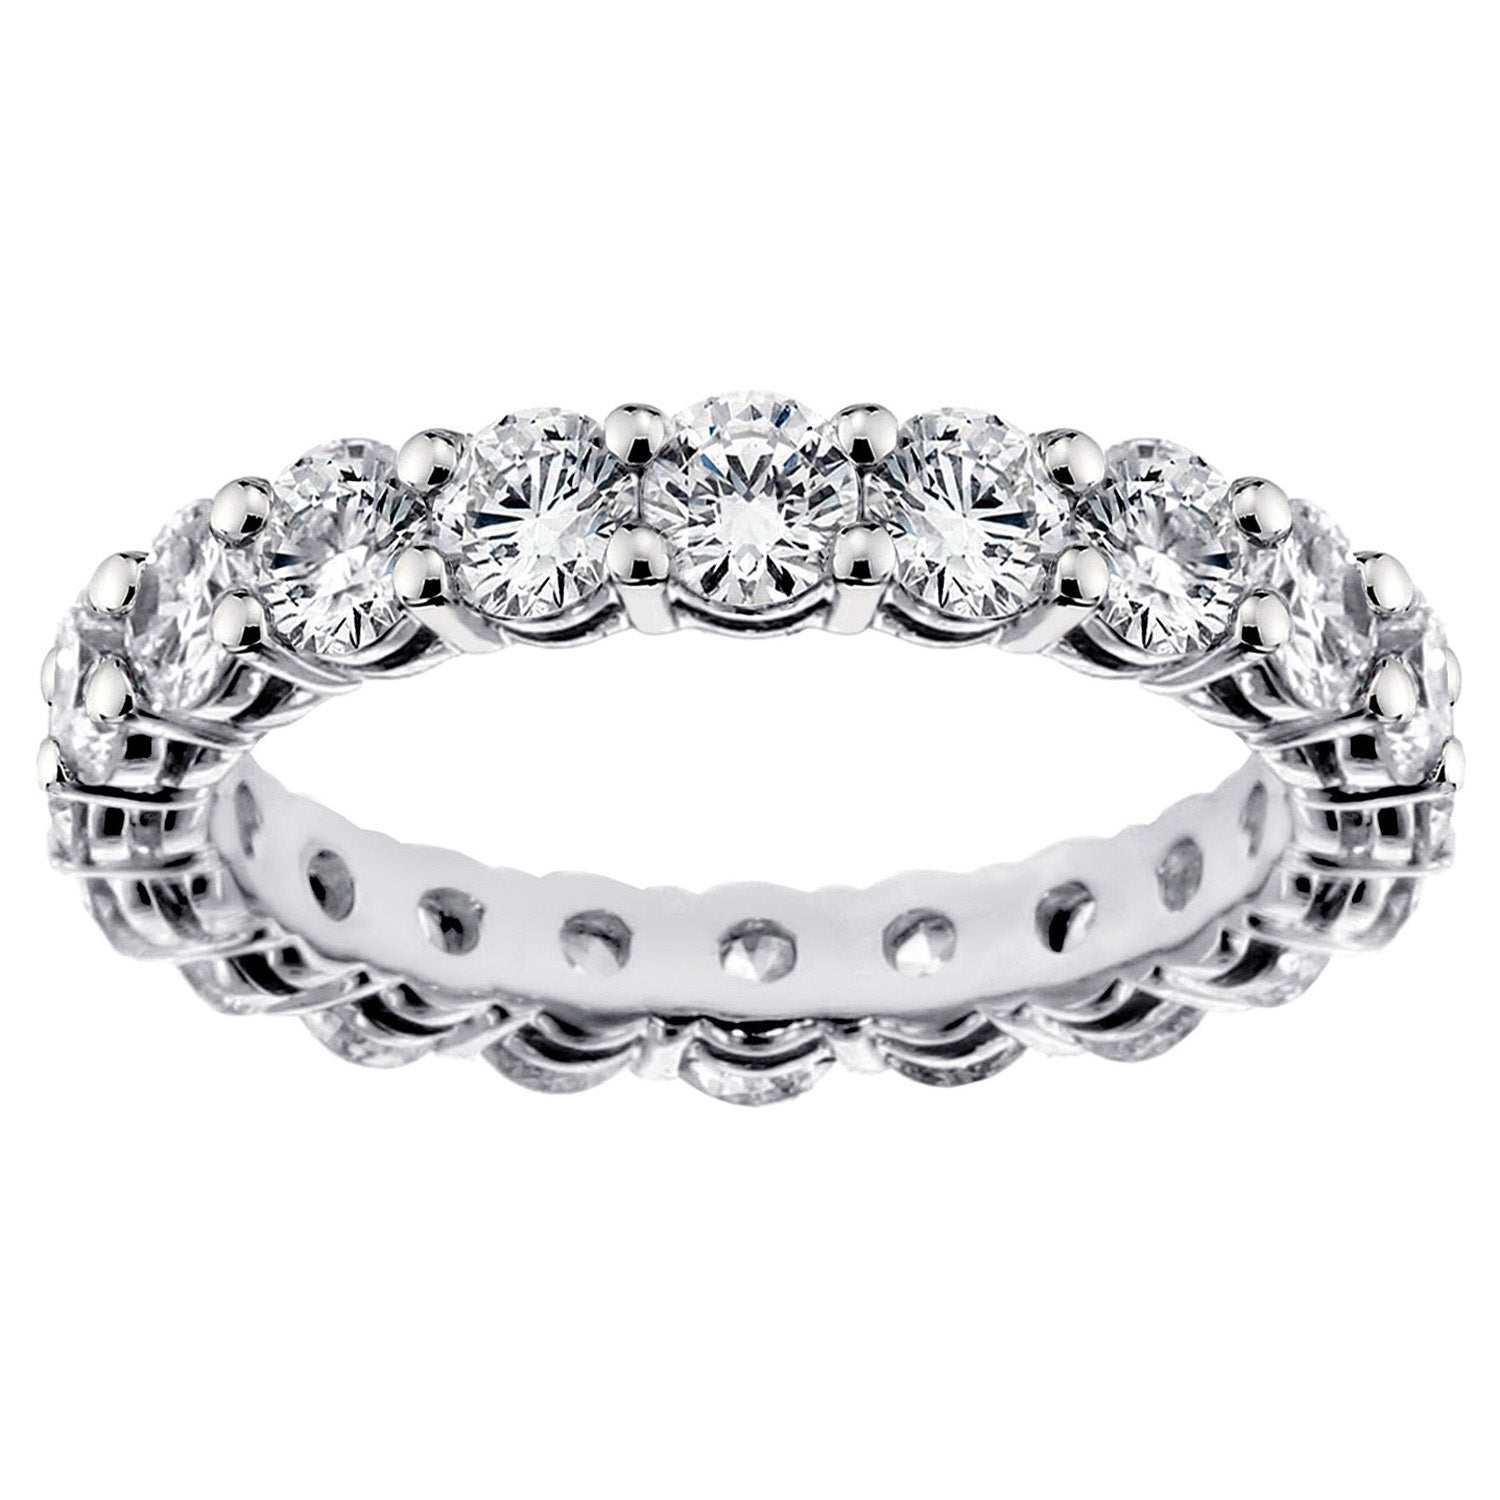 2.75 CT Shared Prong Round Diamond Eternity Wedding Band in 14k White Gold